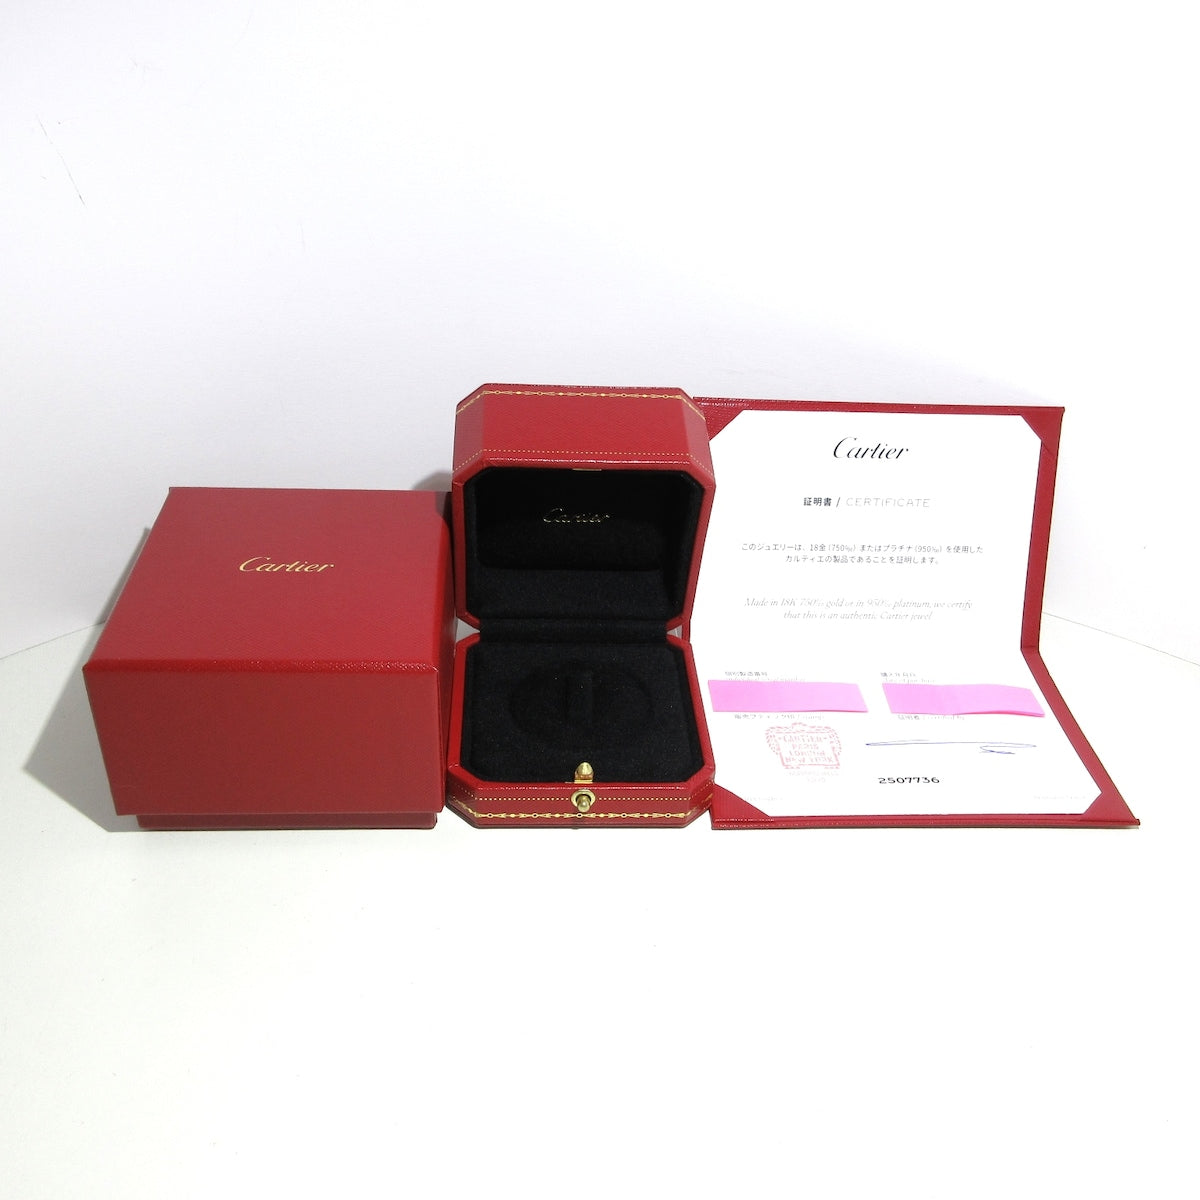 Cartier Women's Yellow Gold Love Ring with Box and Certificate in Gold